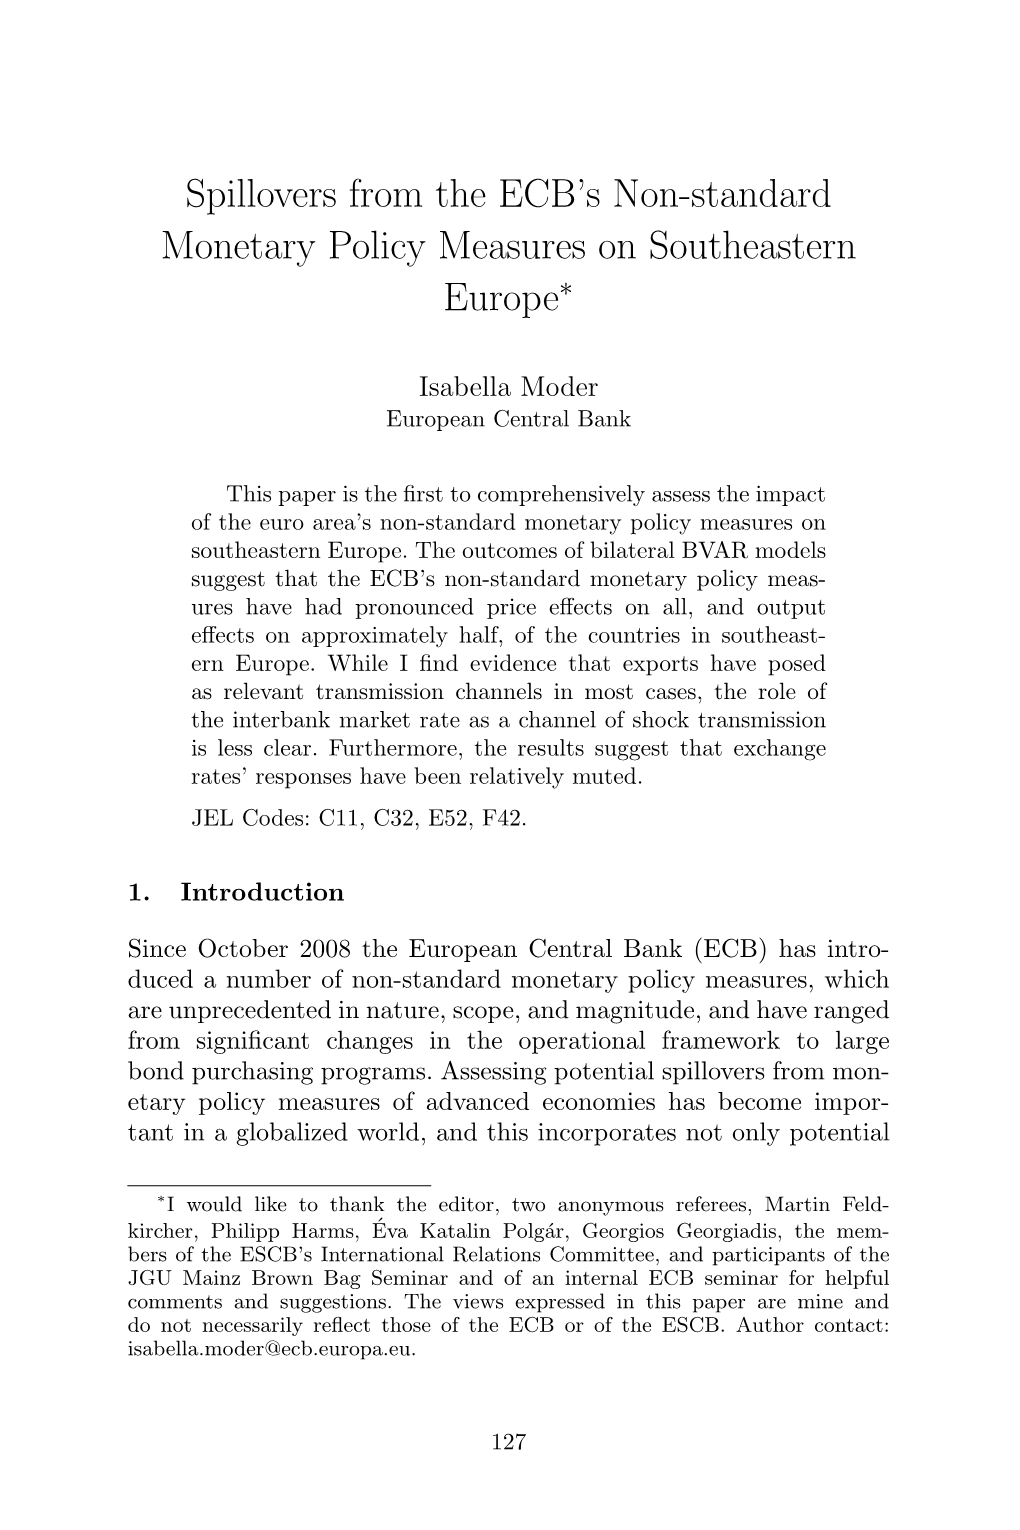 Spillovers from the ECB's Non-Standard Monetary Policy